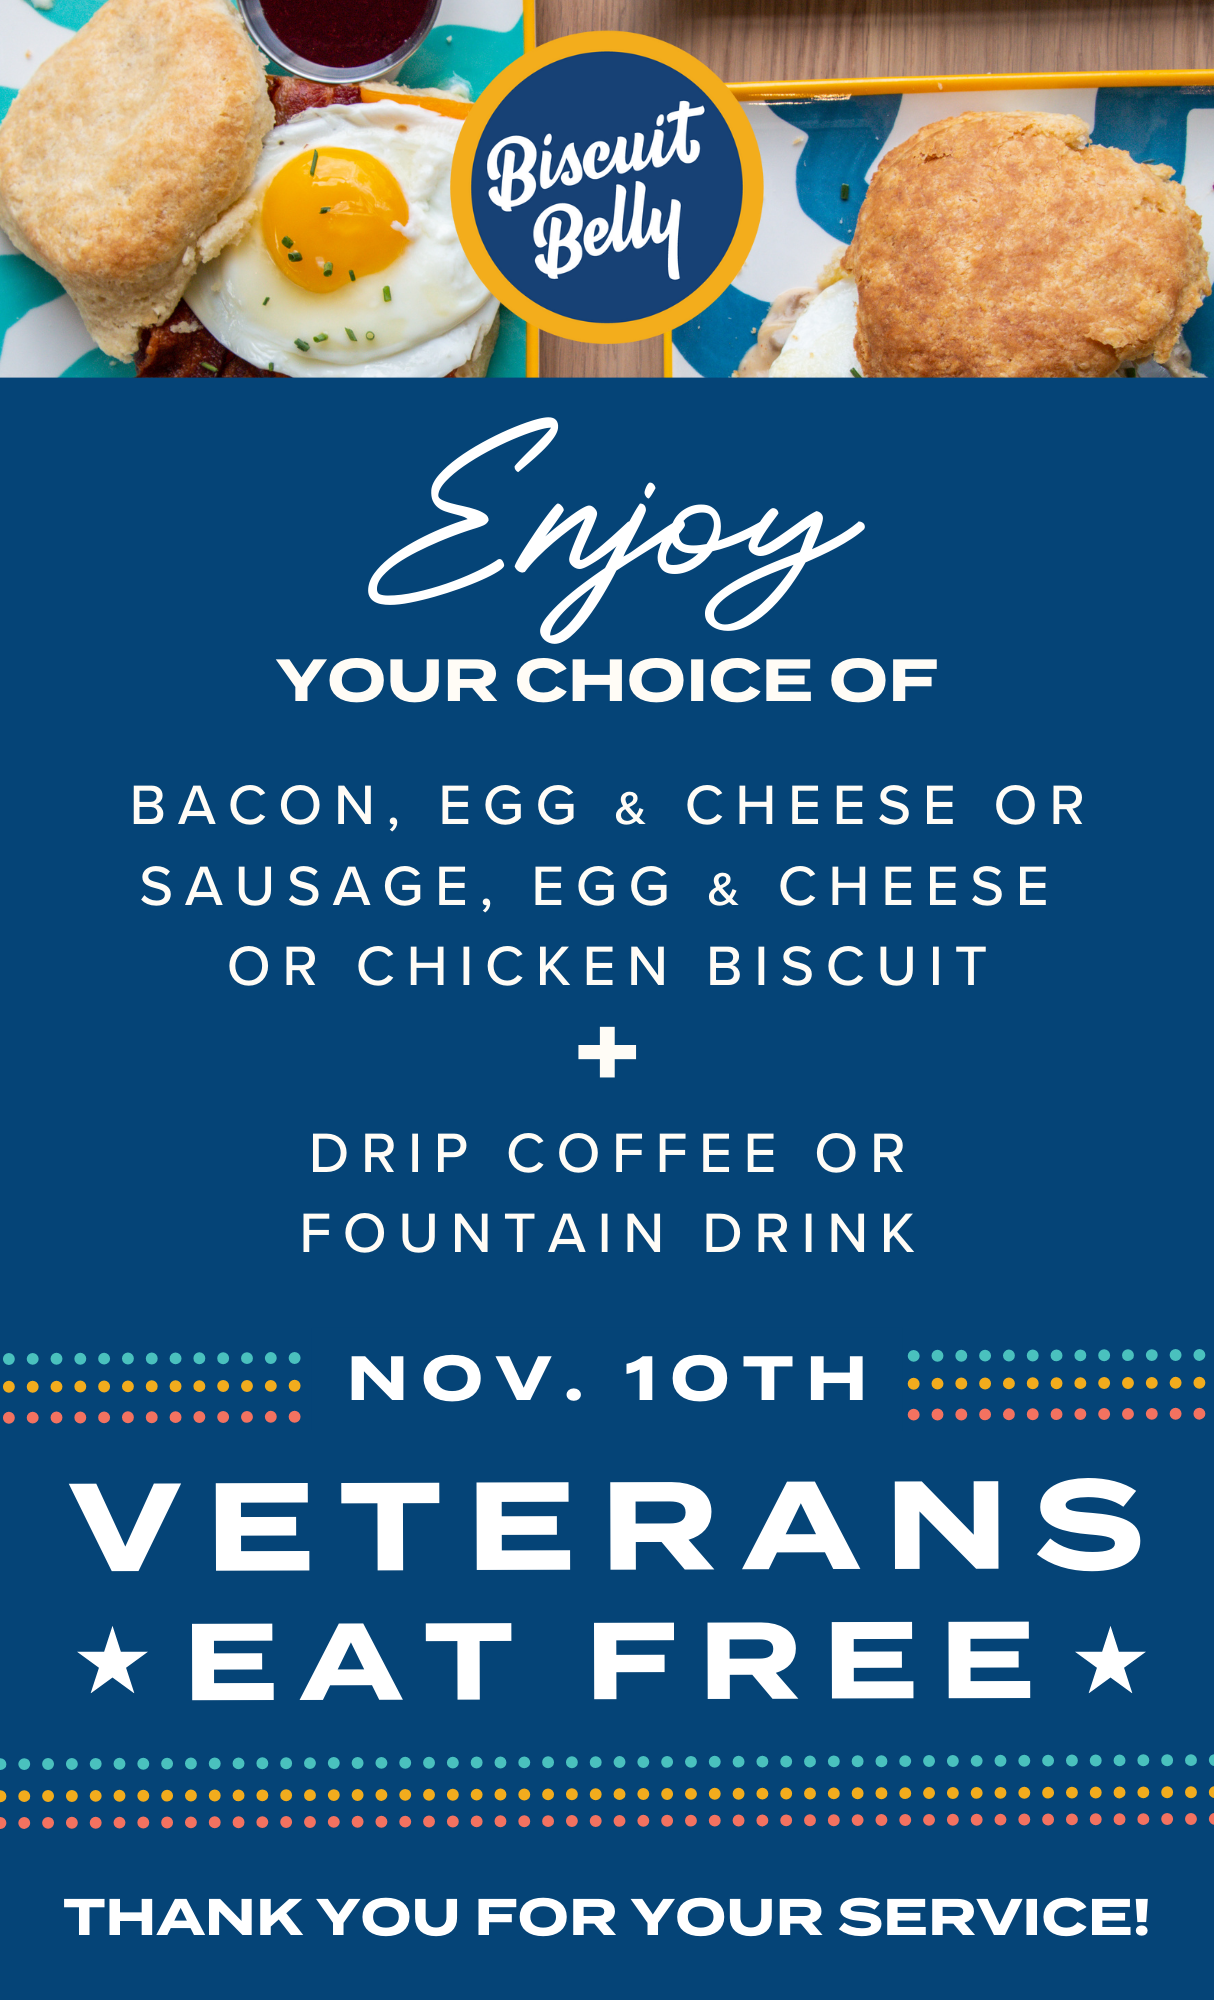 Veterans Eat Free on Nov 10th at Biscuit Belly.